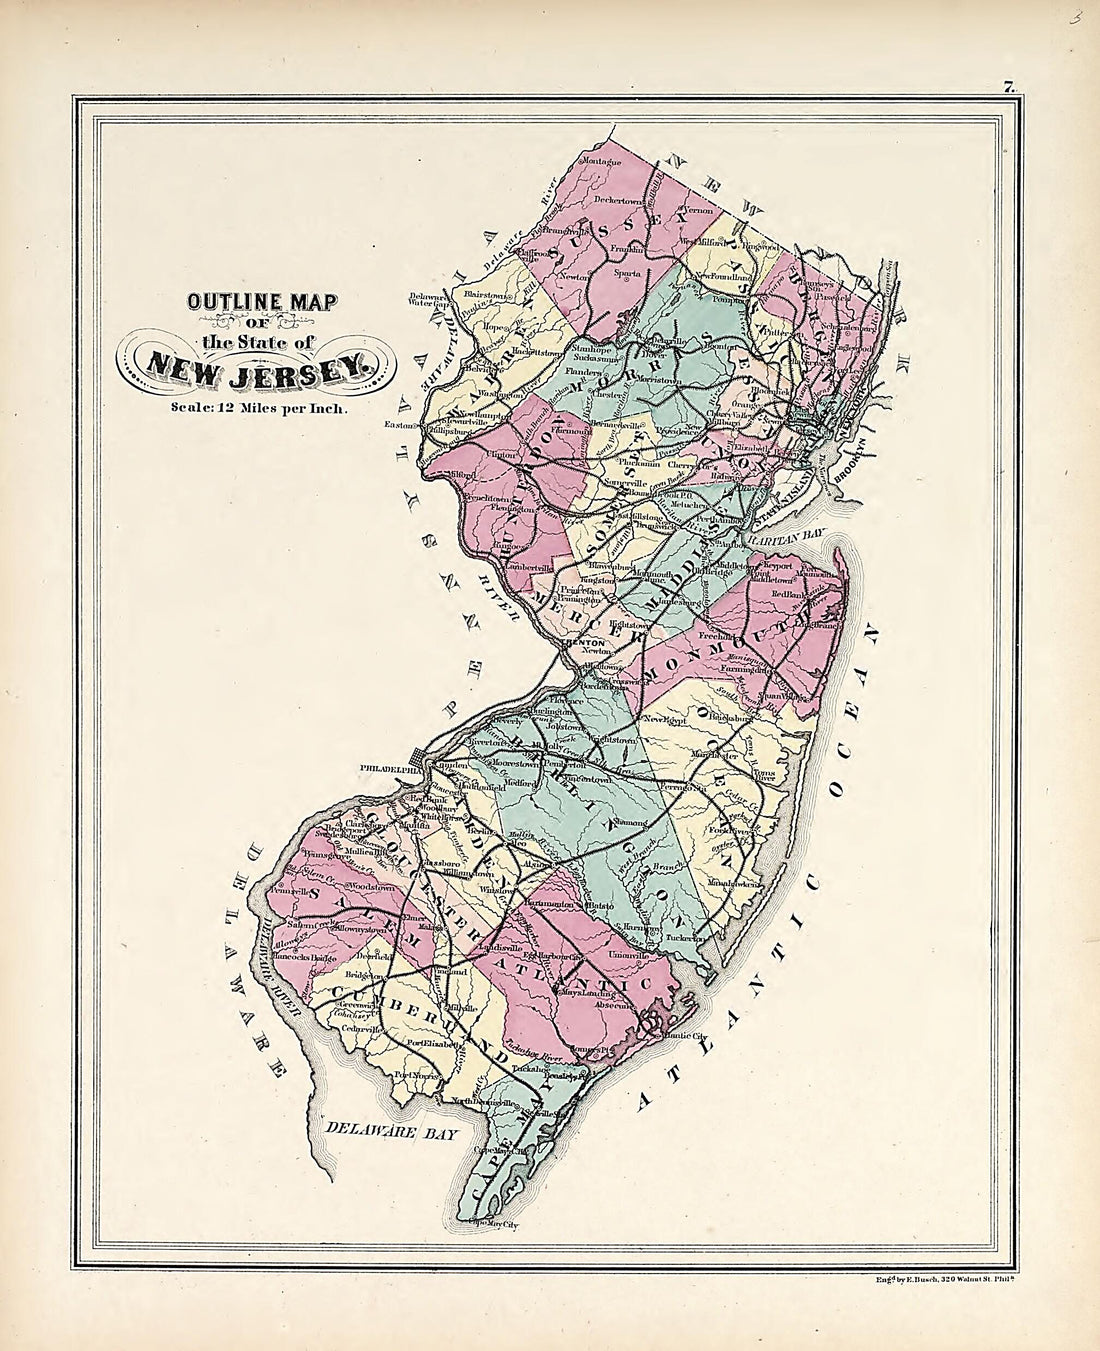 This old map of Outline Map of New Jersey from Atlas of the Late Township of Greenville, and the State of New Jersey from 1873 was created by Griffith Morgan Hopkins in 1873